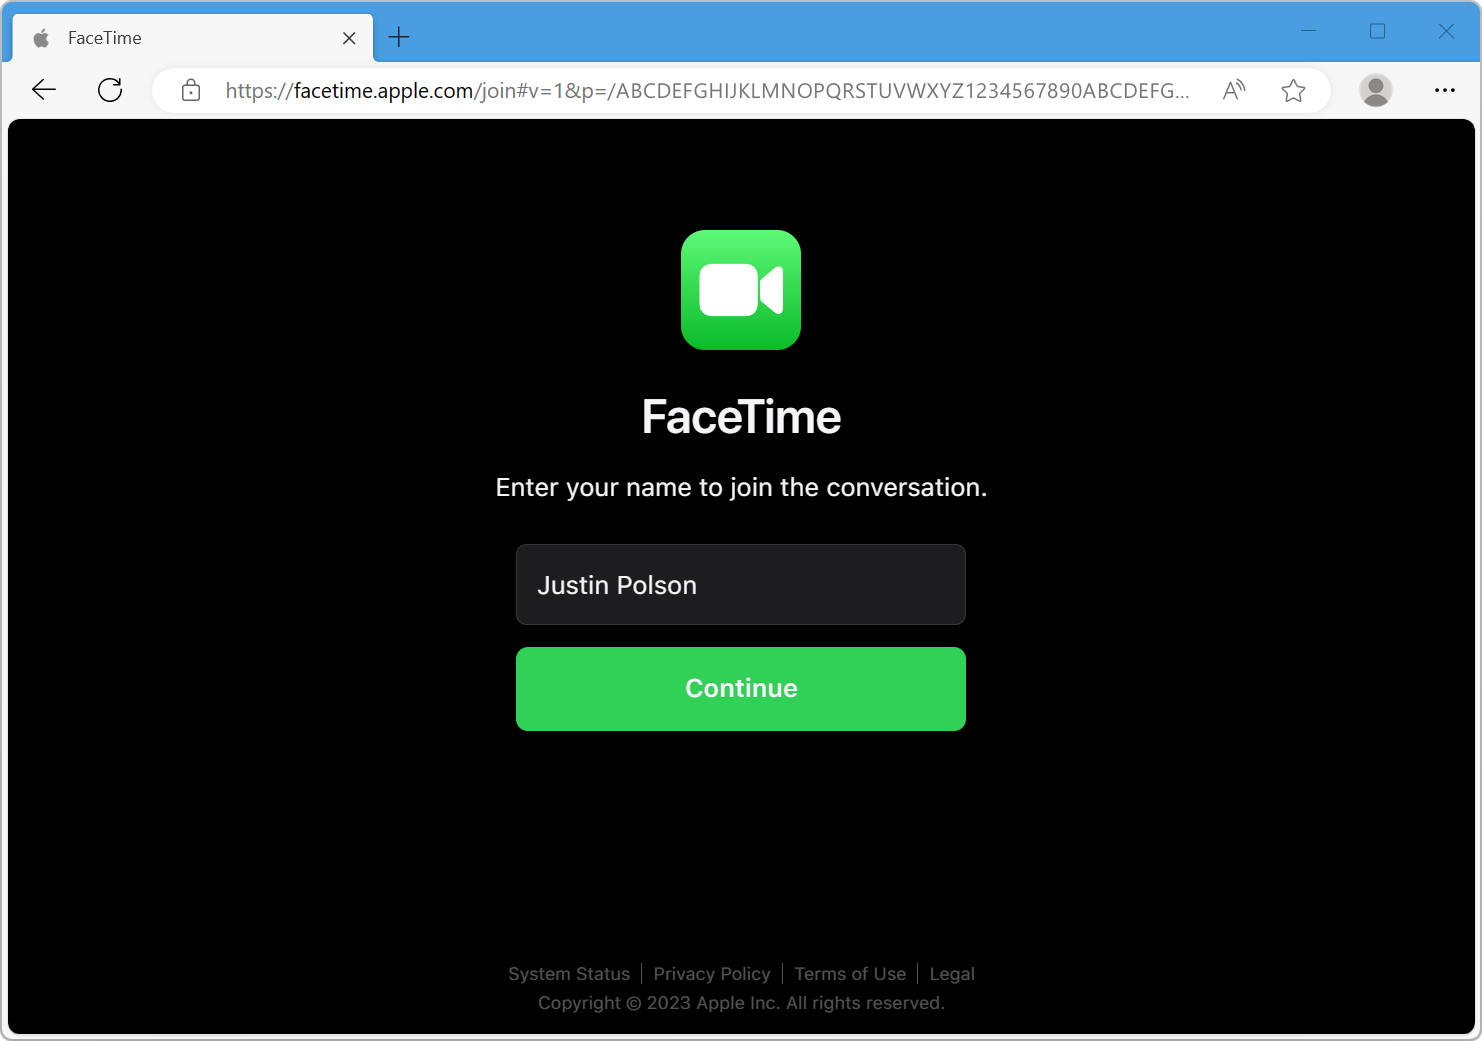 FaceTime link screen in web browser: “Enter your name to join the conversation”.